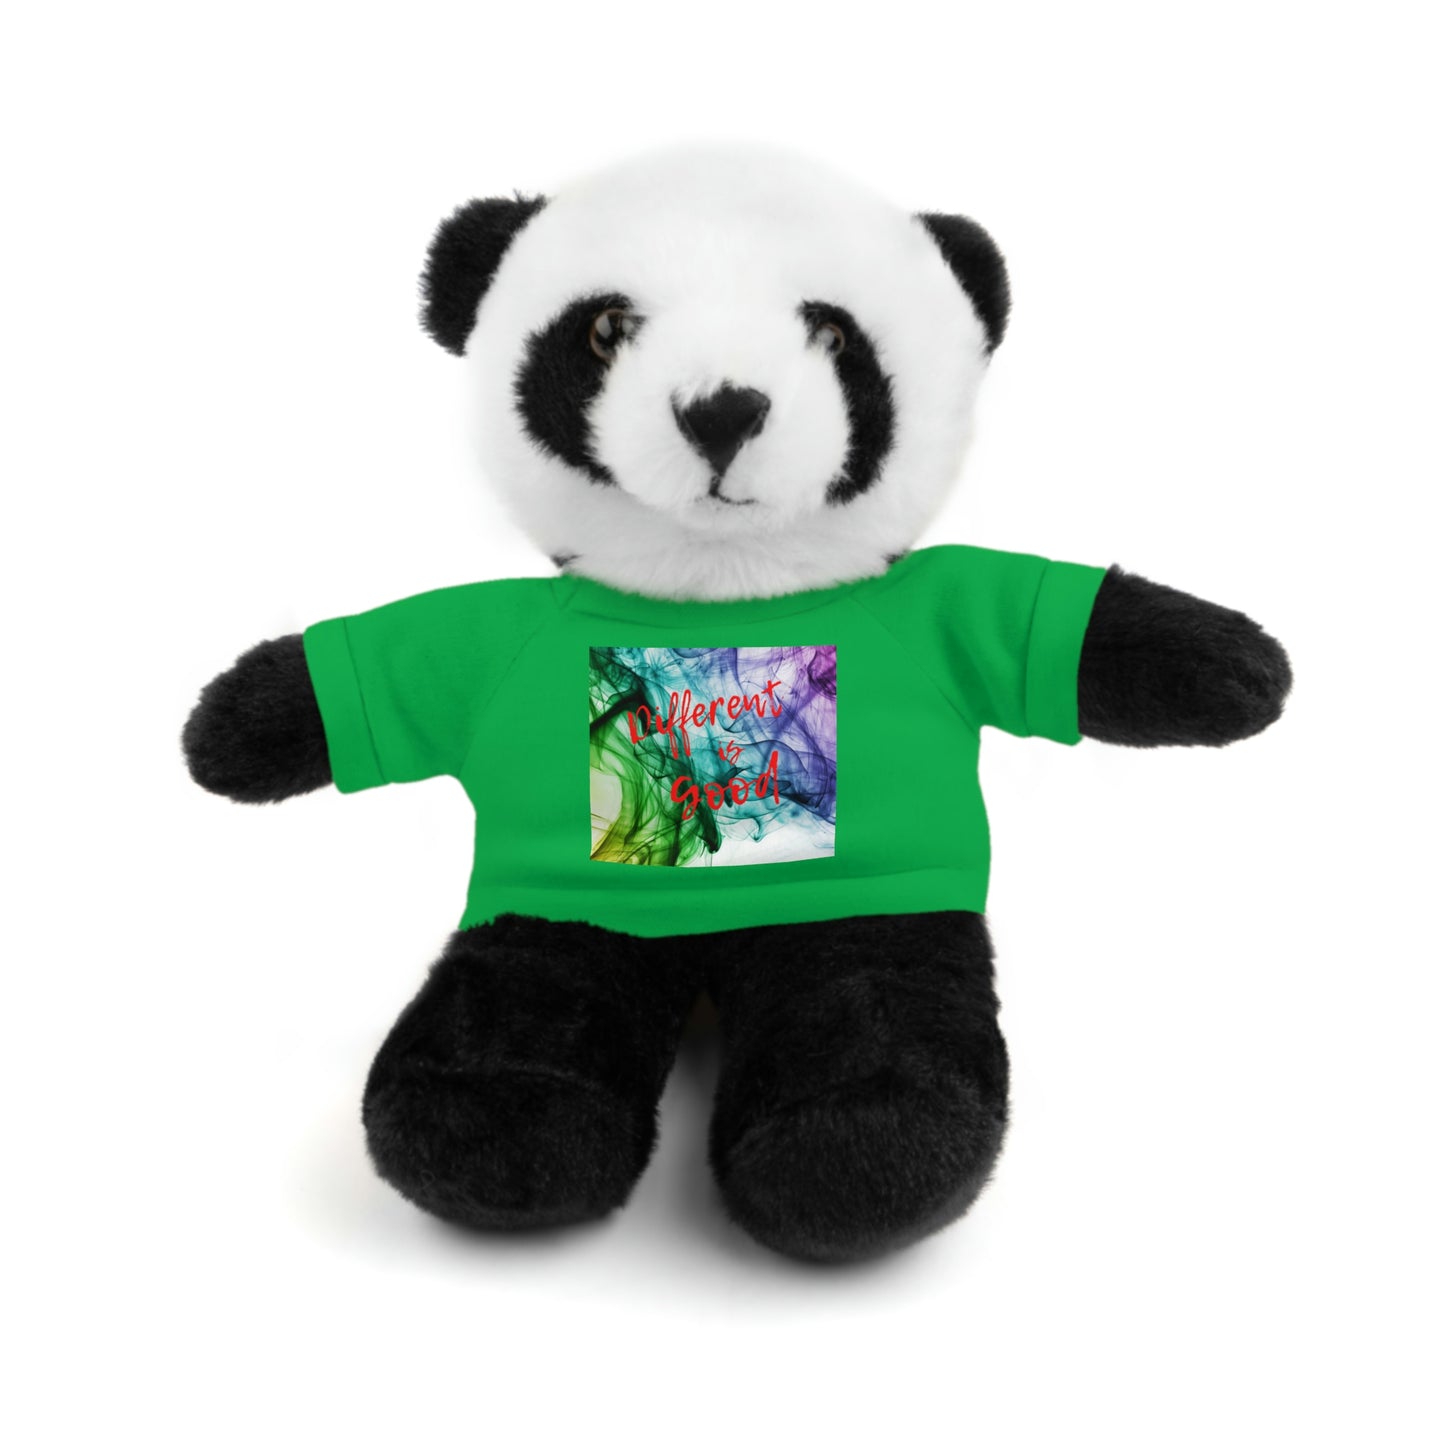 Different Is Good Stuffed Animals with Tee